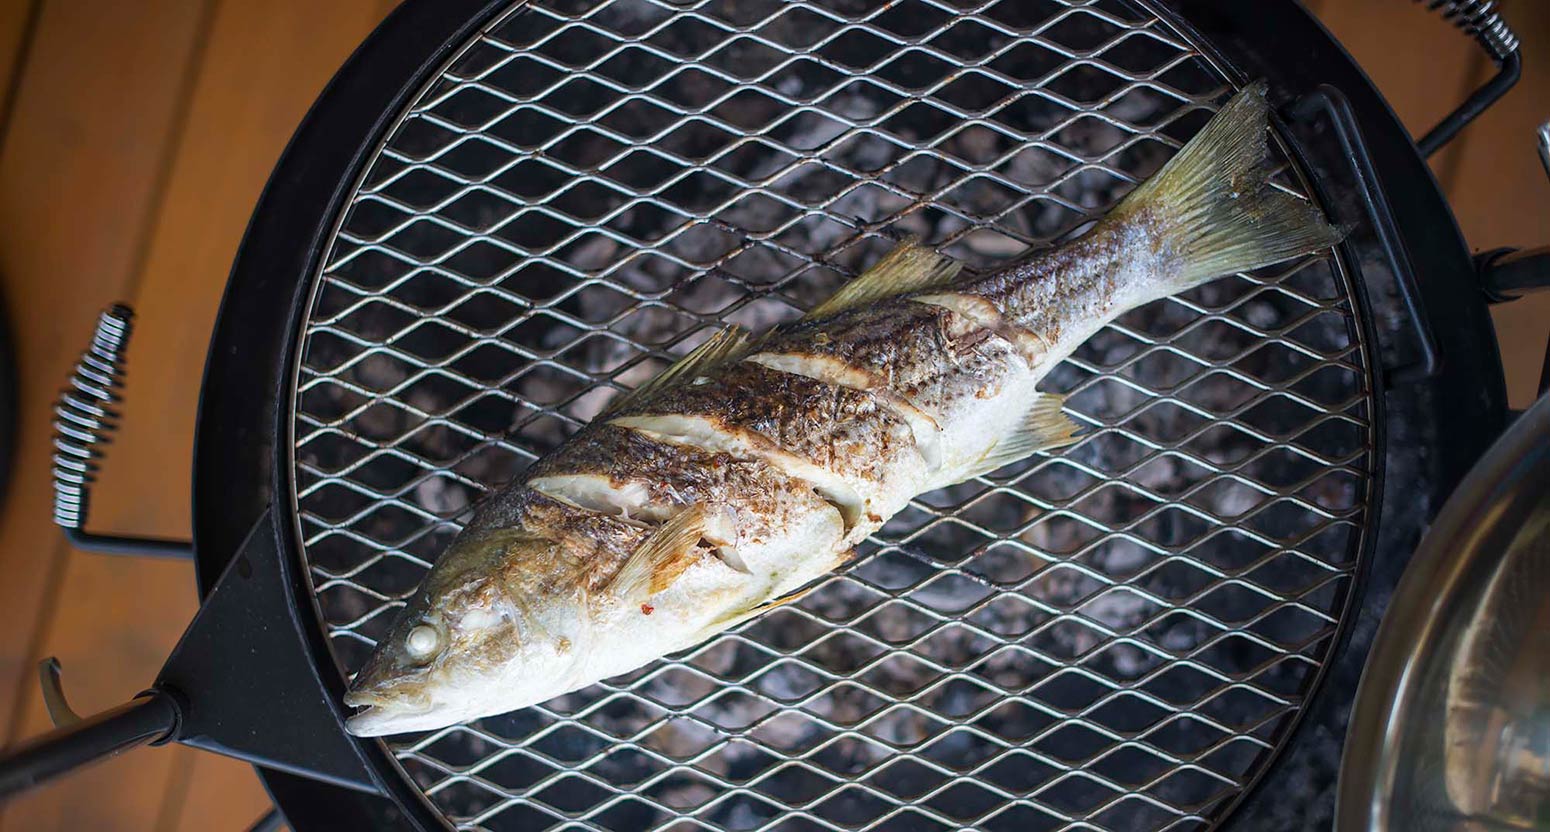 Grilled Whole Fish How To Grill A Whole Fish Hank Shaw,Steamed Rice Panda Express